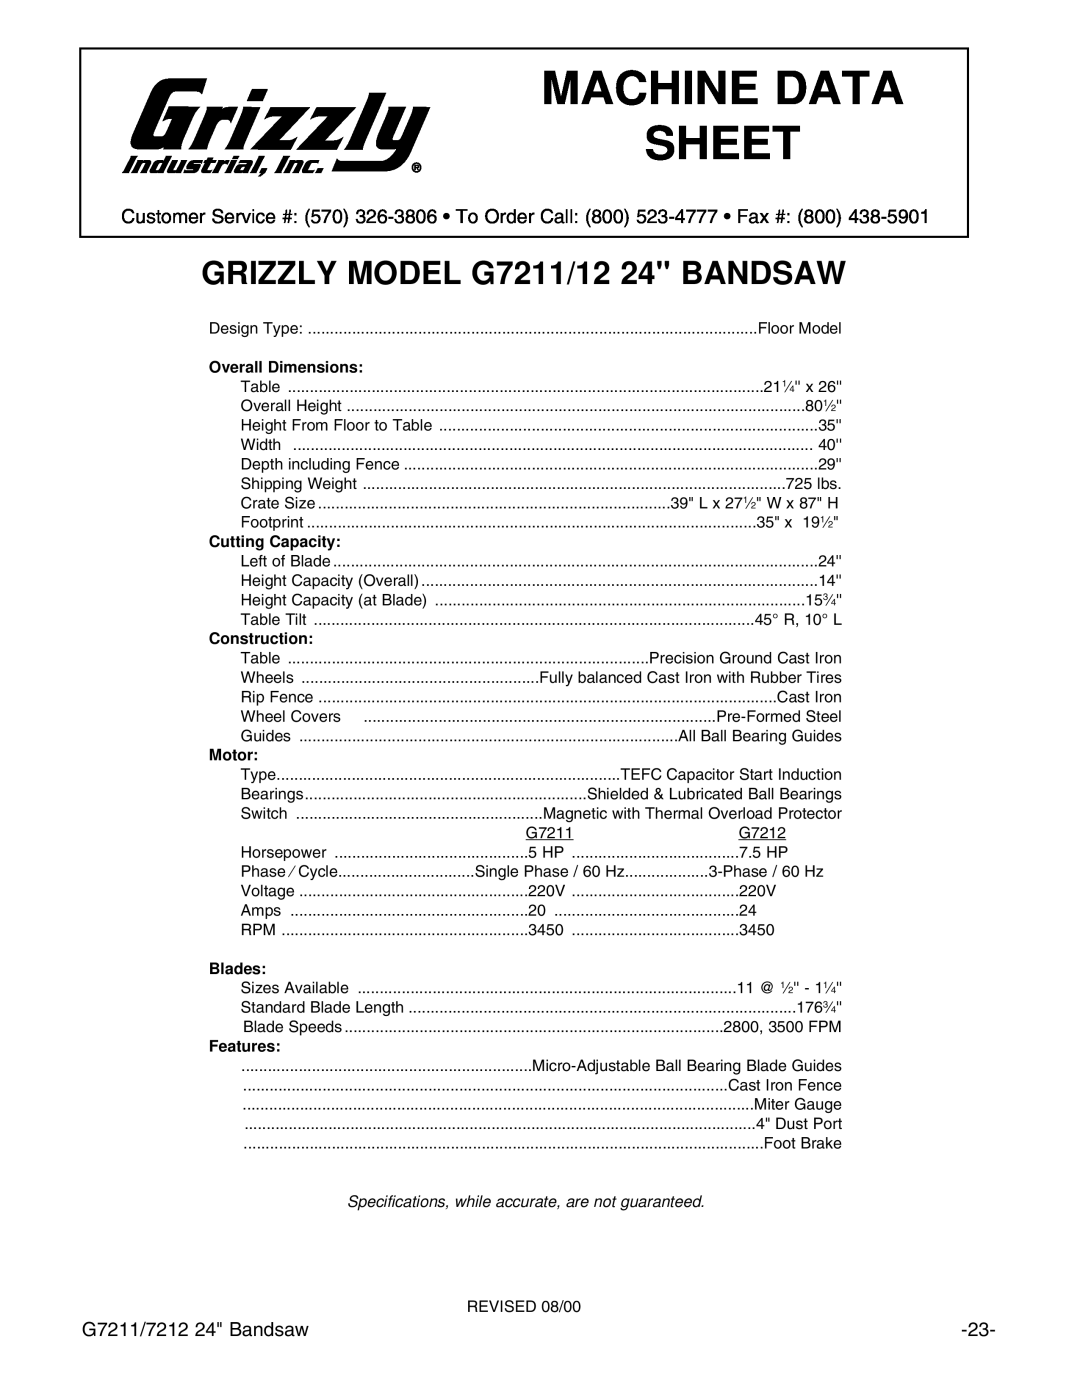 Grizzly GRIZZLY MODEL G7211/12 24 BANDSAW, Machine Data Sheet, Overall Dimensions, Cutting Capacity, Construction 